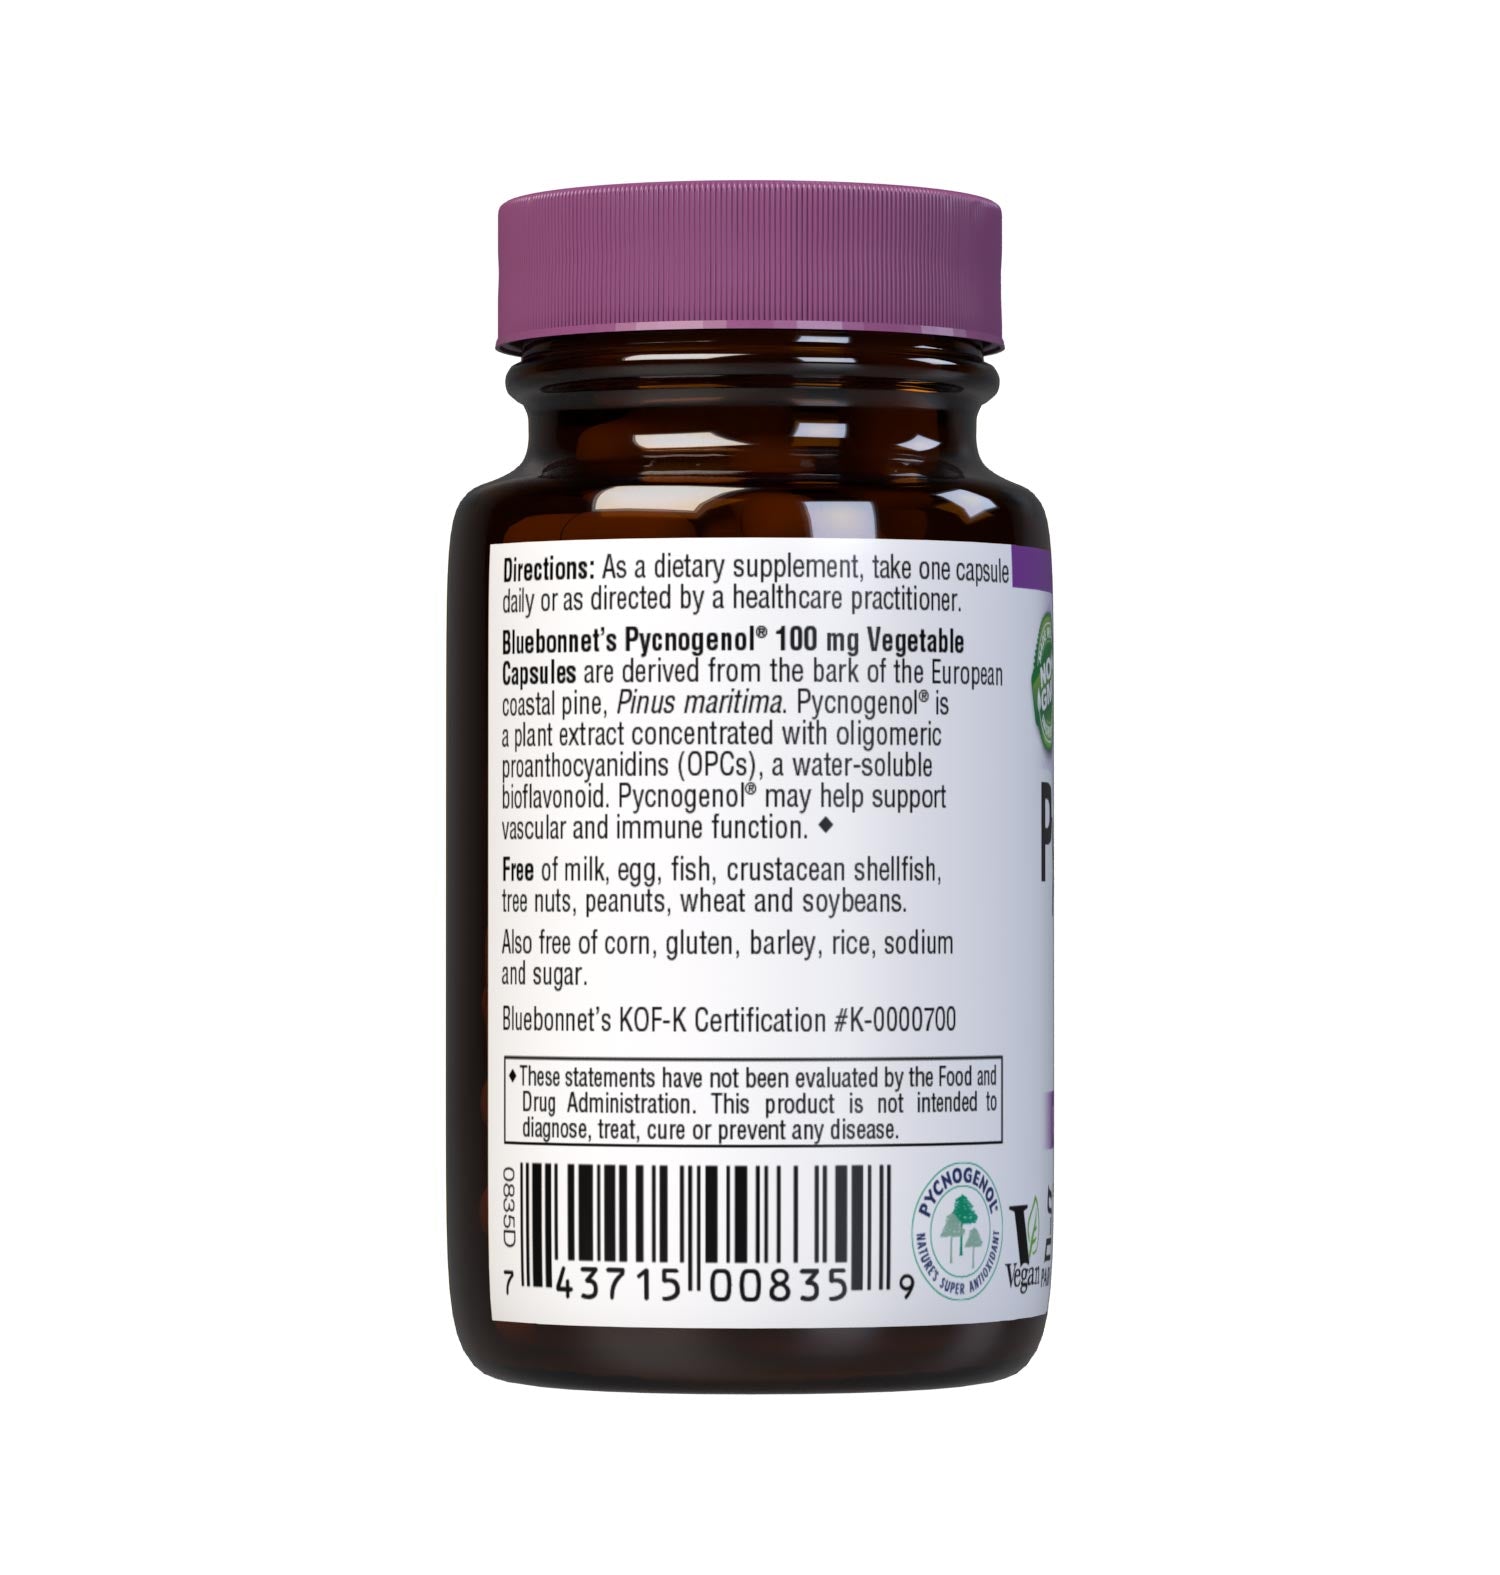 Bluebonnet’s Pycnogenol 100 mg 30 Vegetable Capsules are derived from the bark of the European coastal pine, Pinus maritima. Pycnogenol is a plant extract concentrated with oligomeric proanthocyanidins (OPCs), a water-soluble bioflavonoid. Pycnogenol may help support vascular and immune function. Description panel. #size_30 count